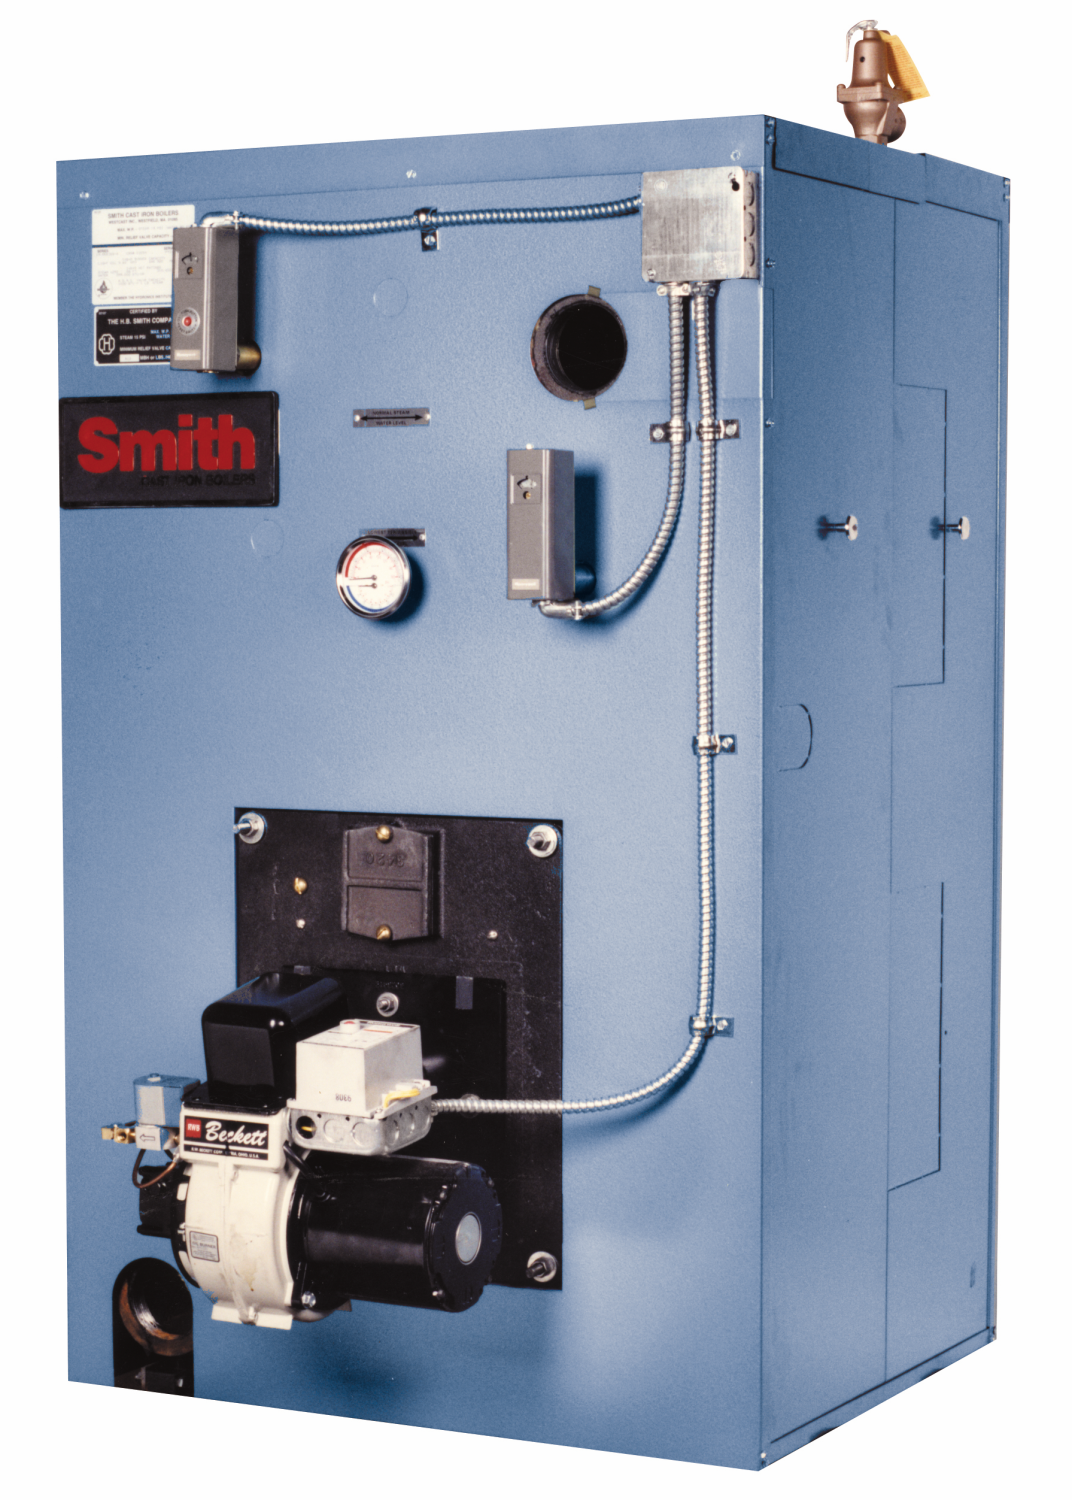 19HE Series - High-Efficient Commercial Boiler For Sales in Livonia, MI - 19A_Series_Boiler